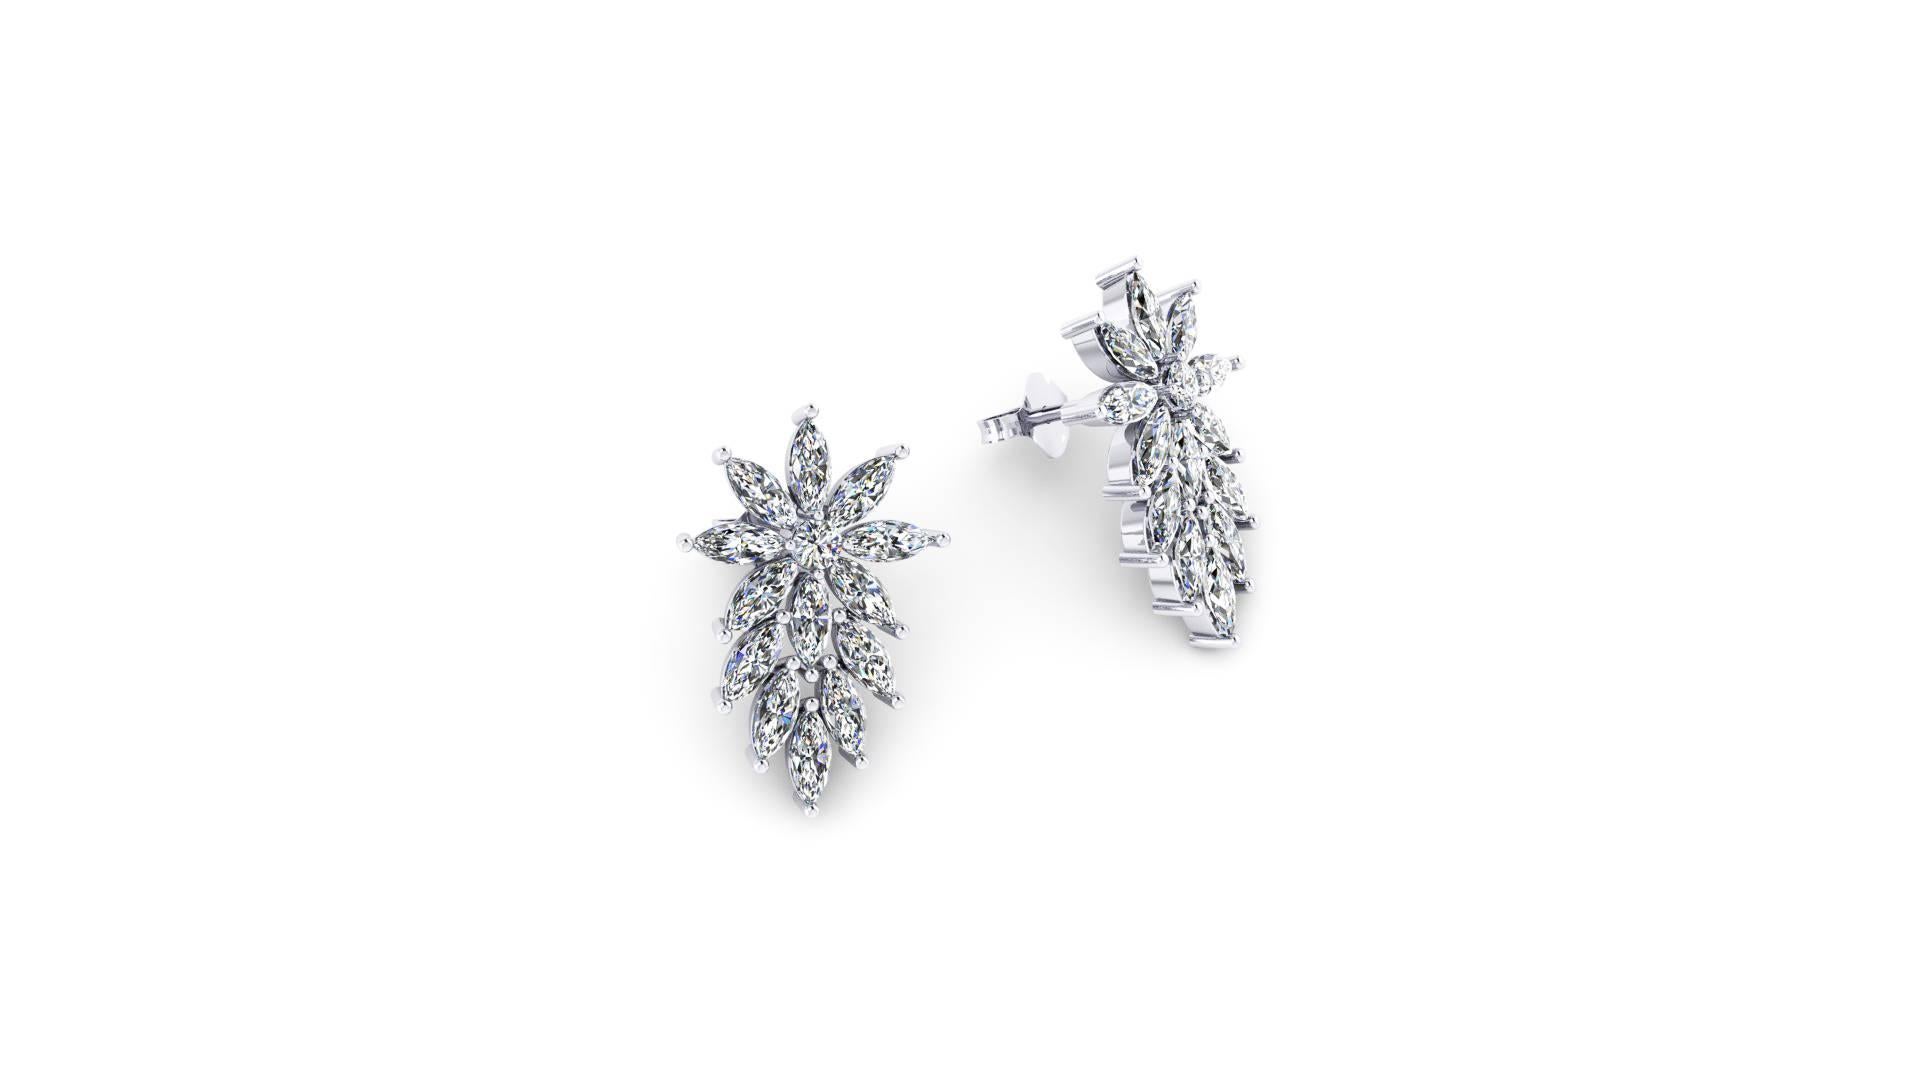 3.40 Carats Marquise shape Diamonds Star earrings, hand made in Platinum in New York by Italian master jeweler, stunning diamond earrings, high sparkle, chic and fine elegance for every age tasteful women, ideal gift 